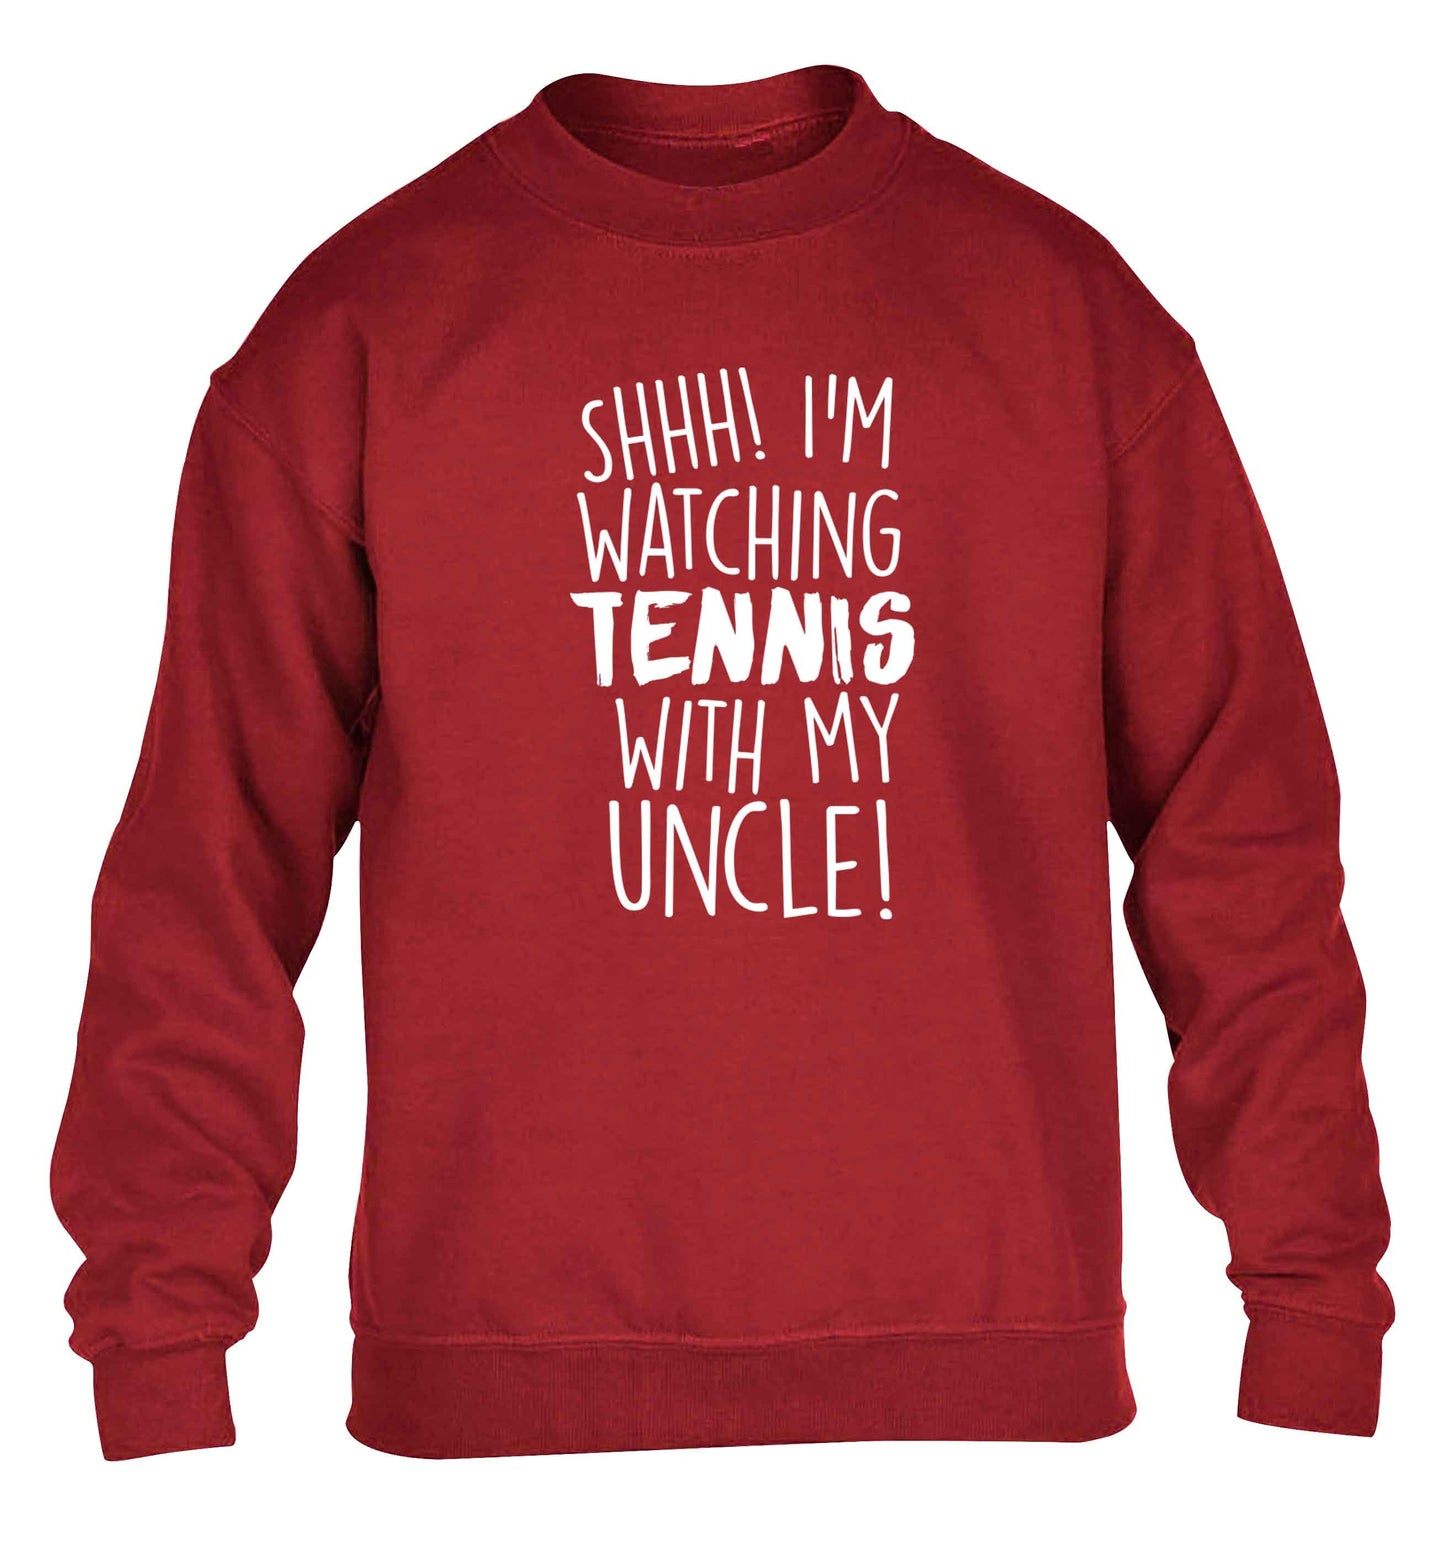 Shh! I'm watching tennis with my uncle! children's grey sweater 12-13 Years